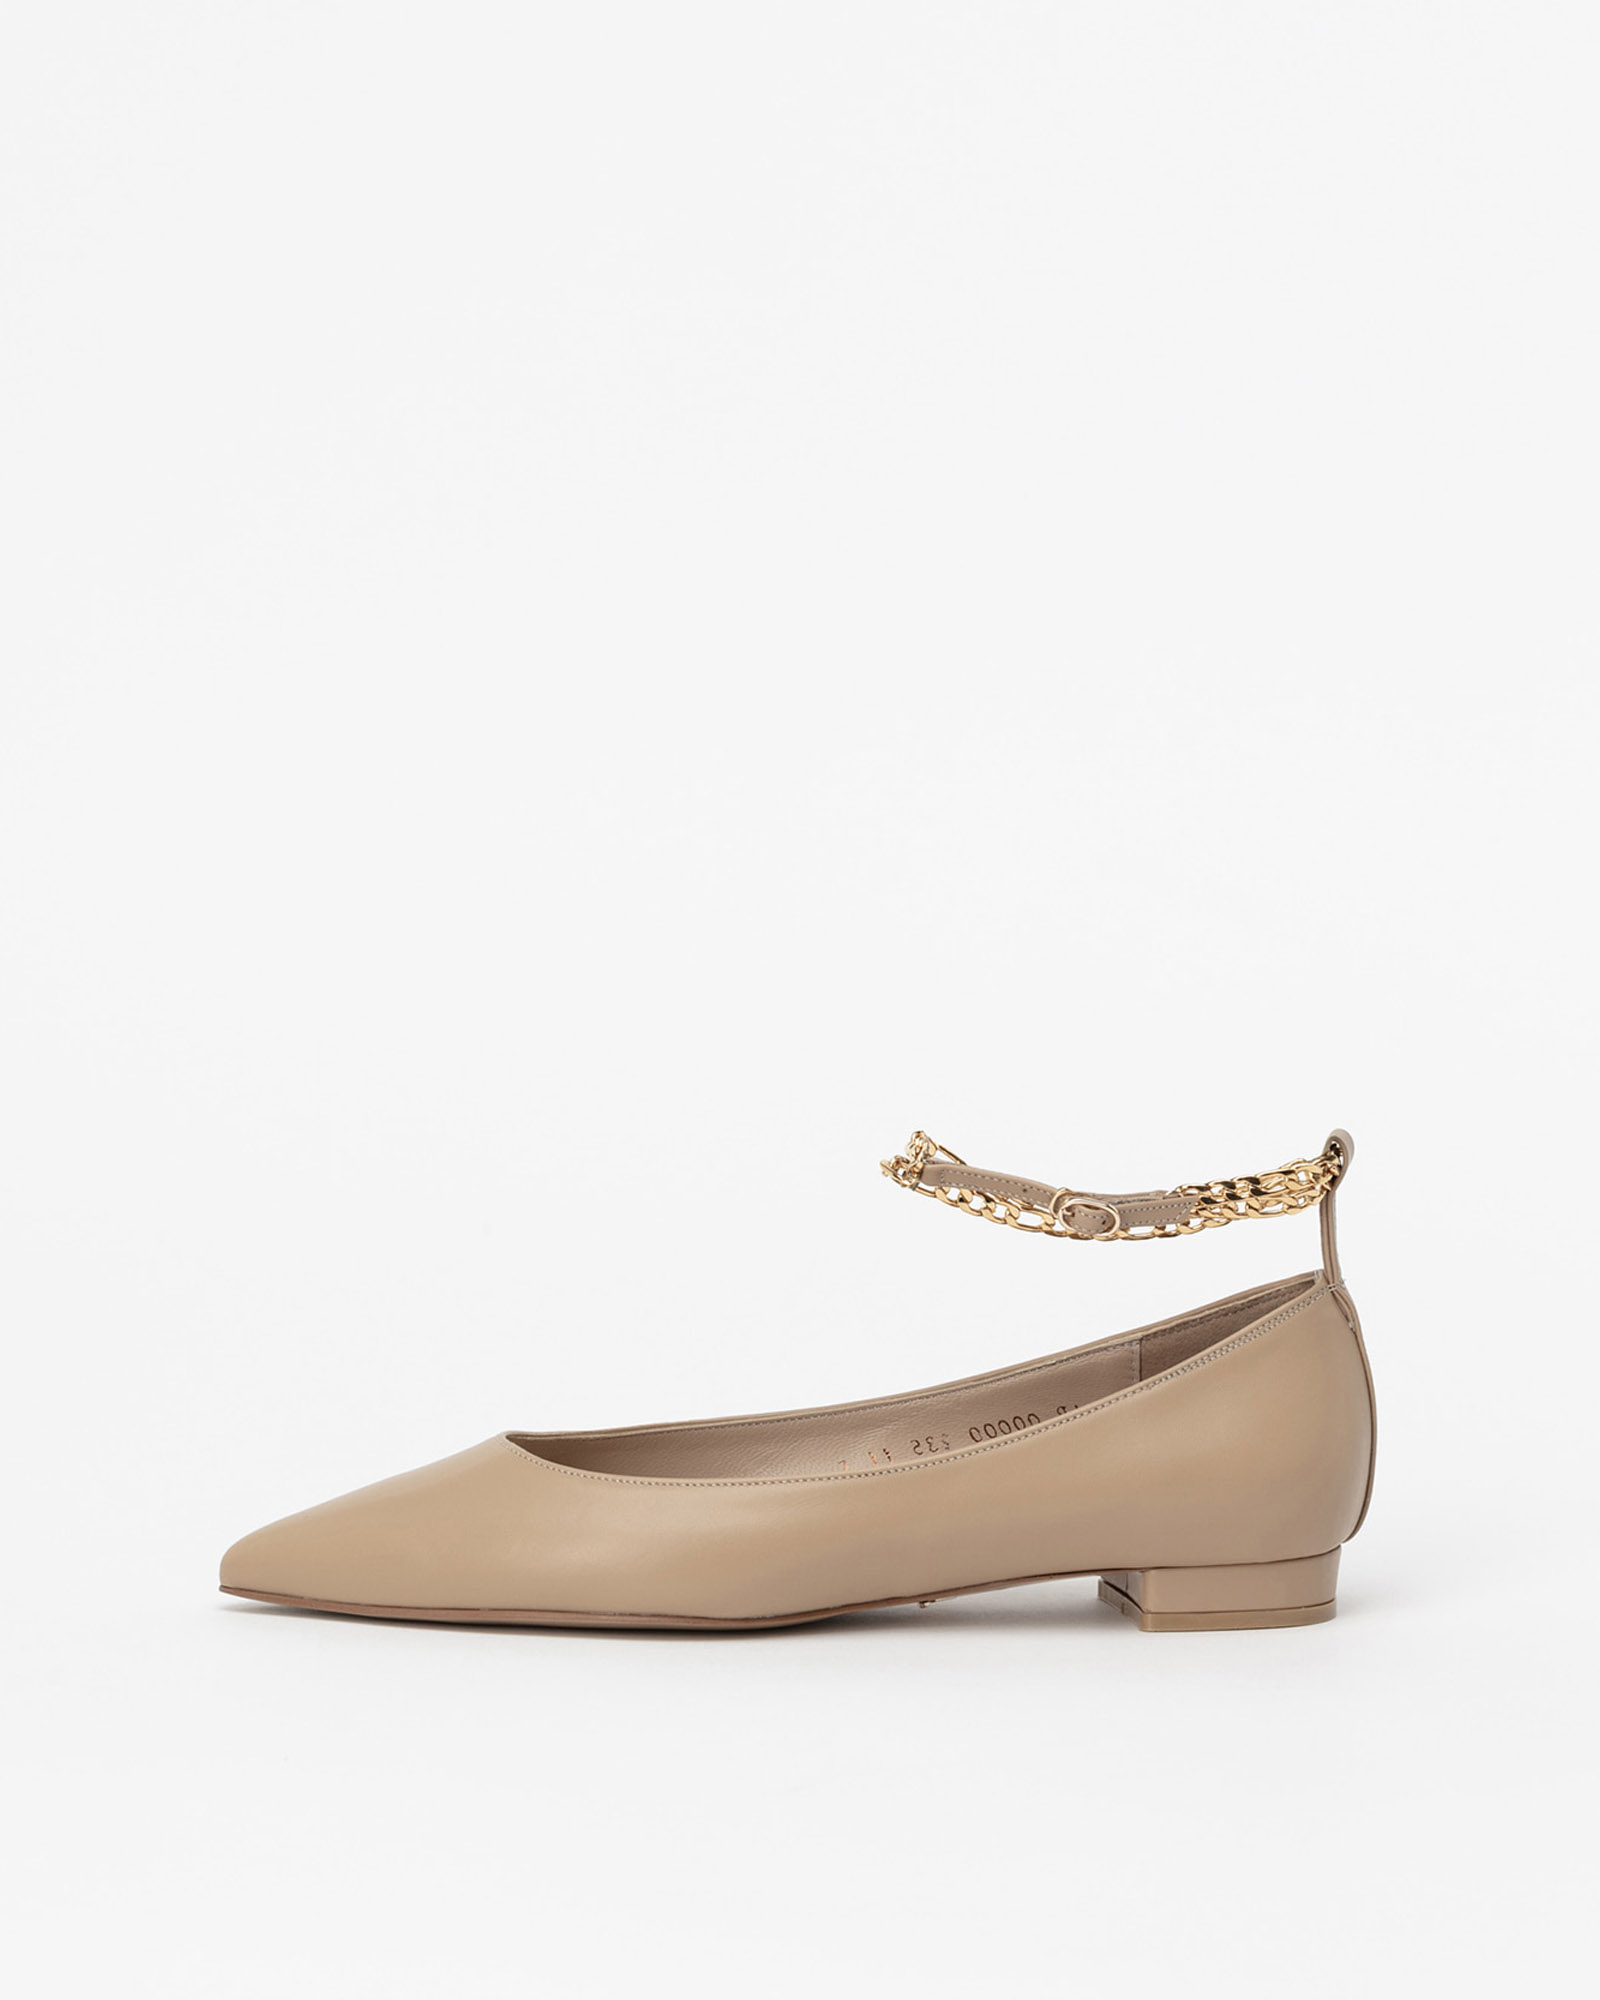 Ferret Chained Flat Shoes in Down Yellow Beige